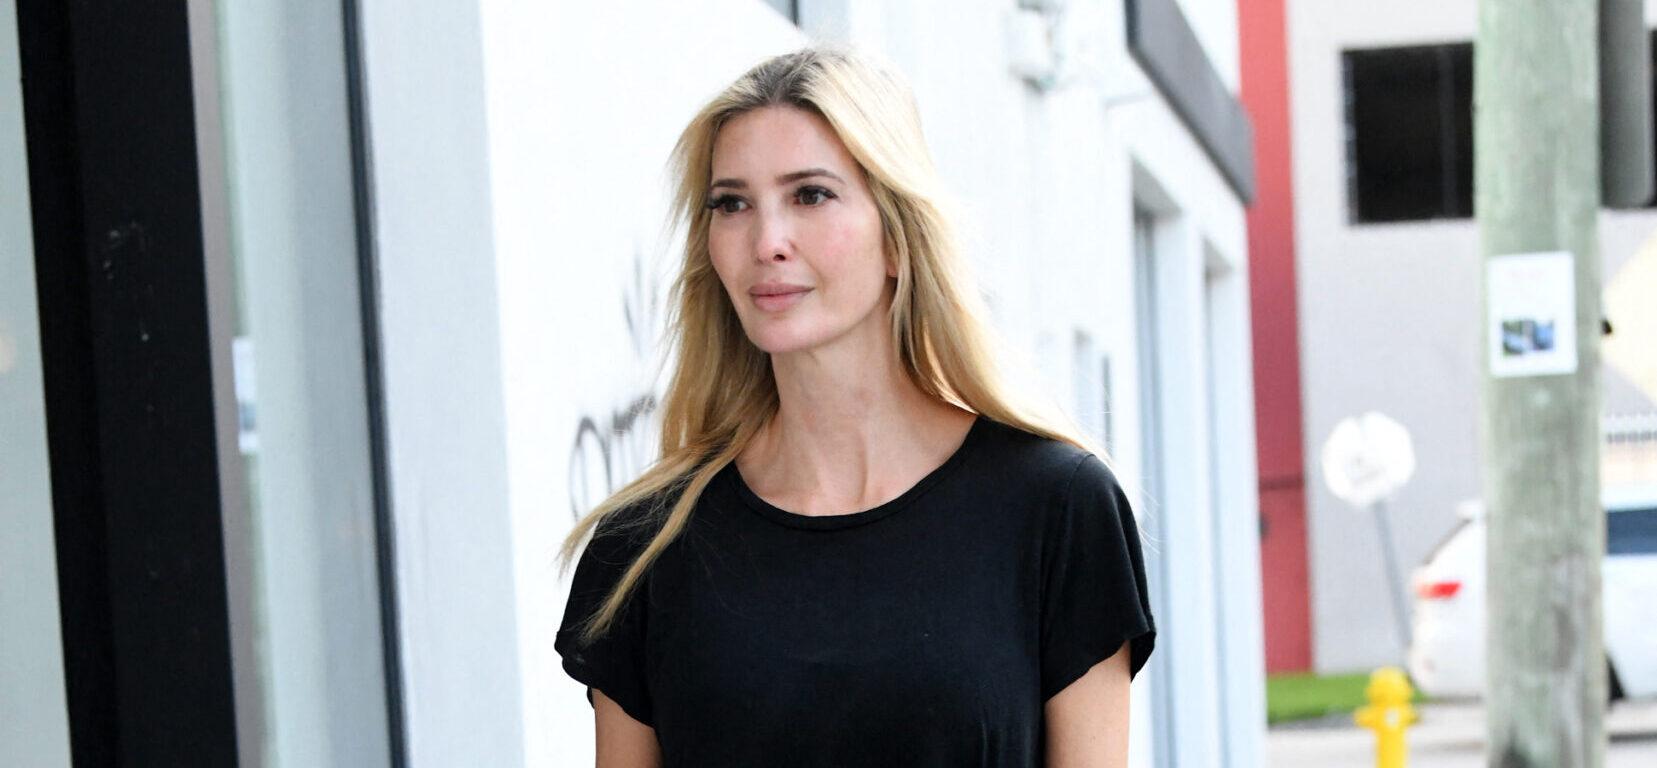 Ivanka Trump goes for a workout at her gym in Miami after attending the FIFA World Cup Qatar 2022 with her family